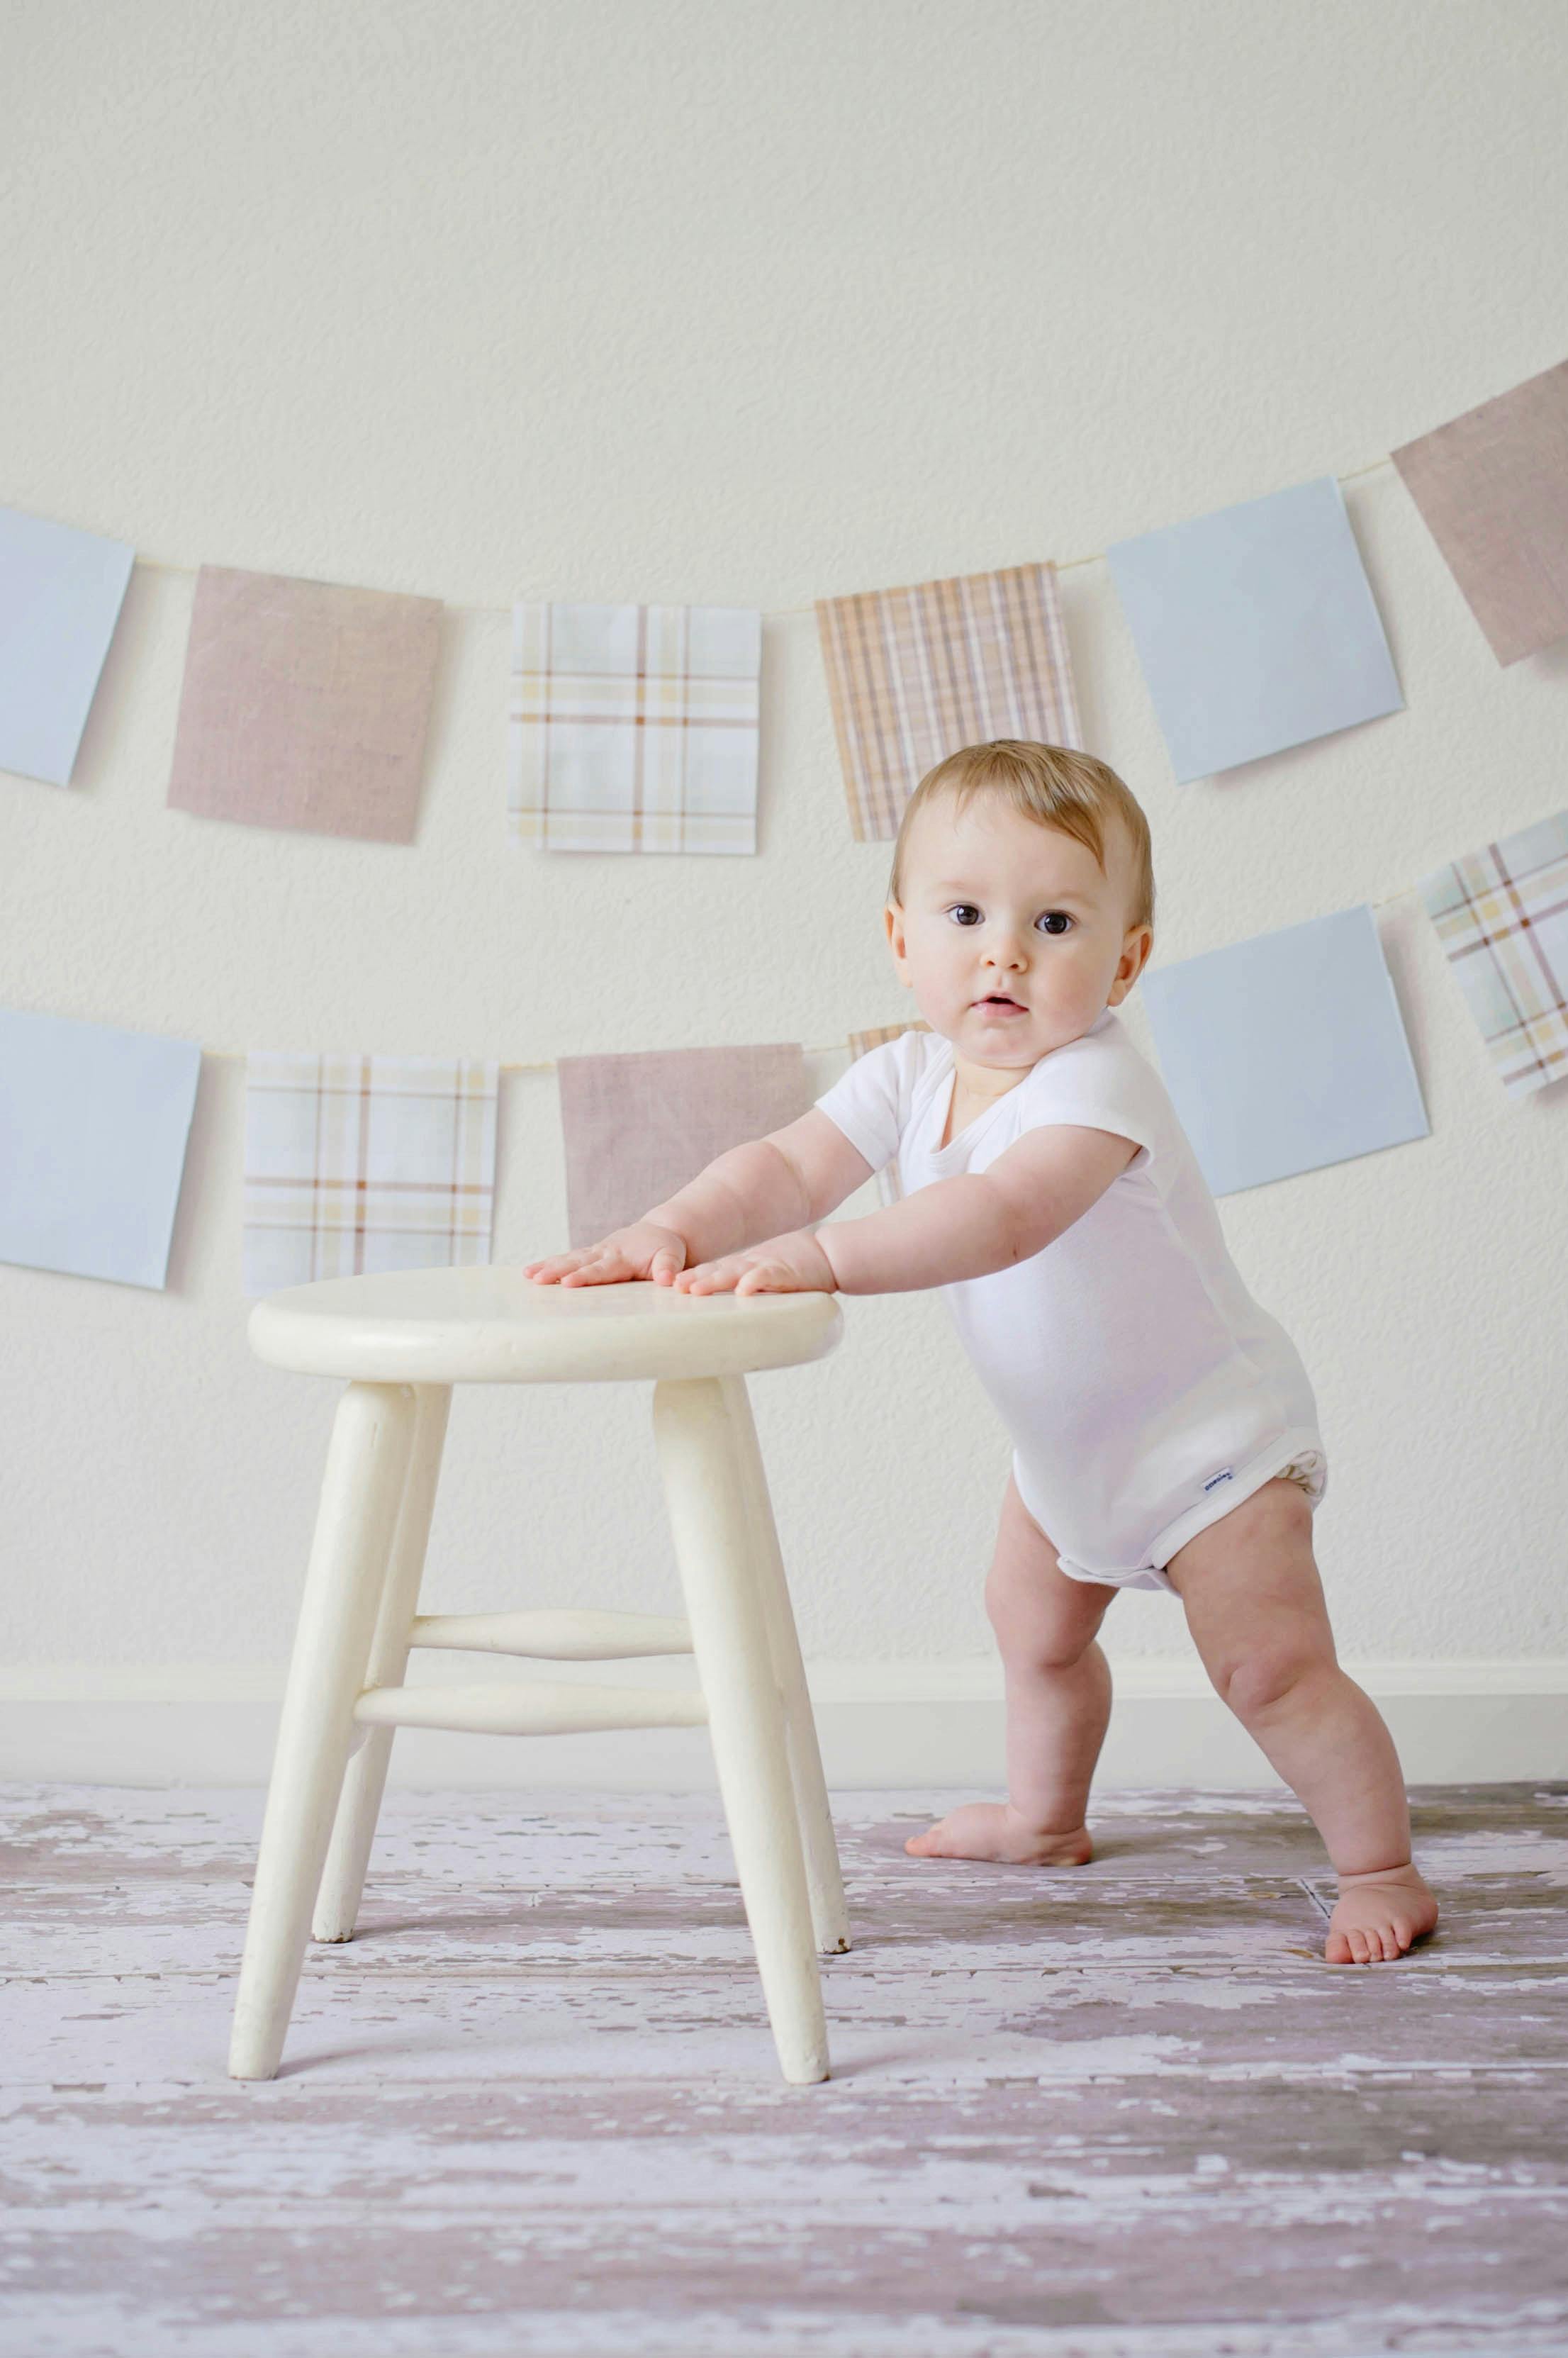 A baby holding on to a stool | Source: Pexels